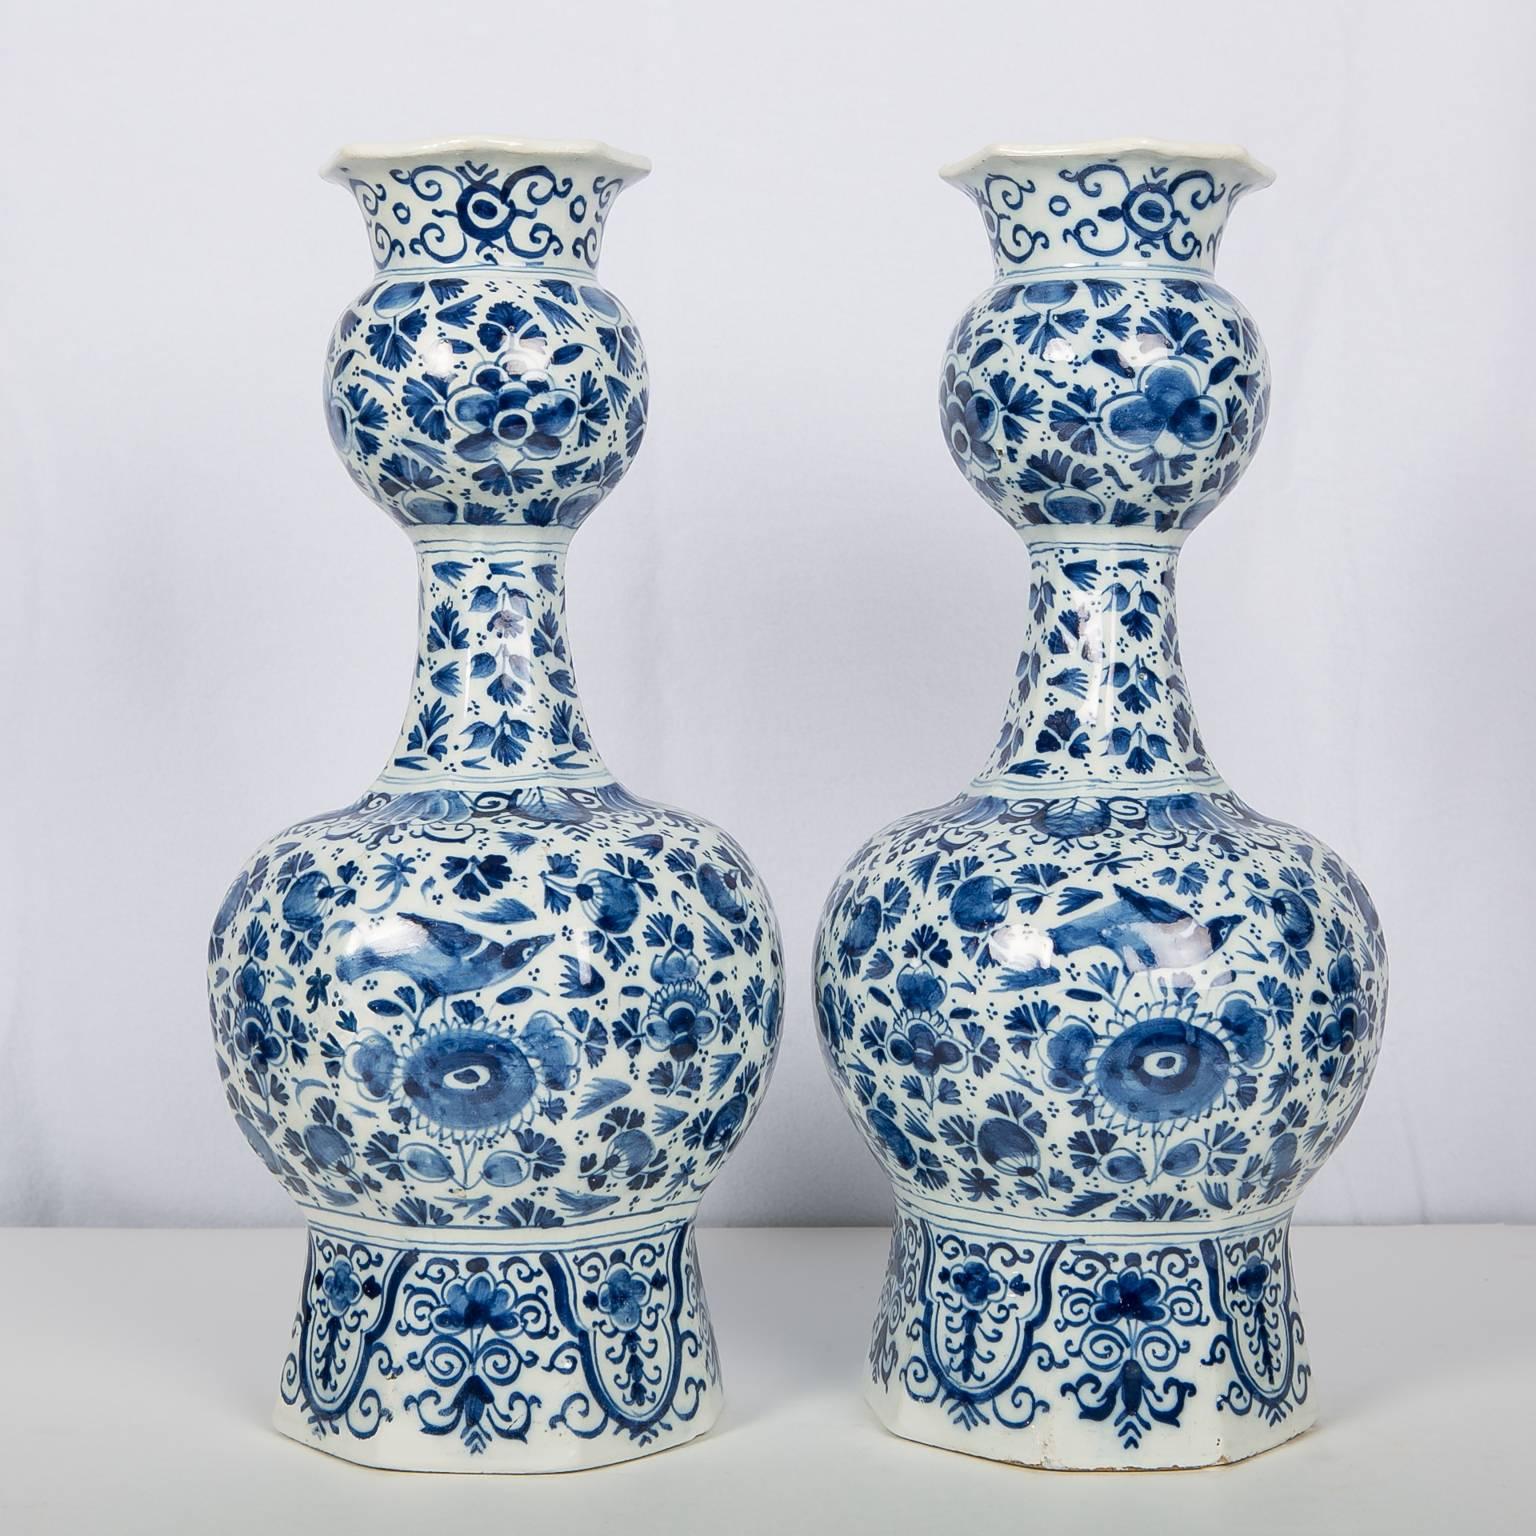 Antique Blue and White Delft Vases Pair Hand-Painted   IN STOCK 2